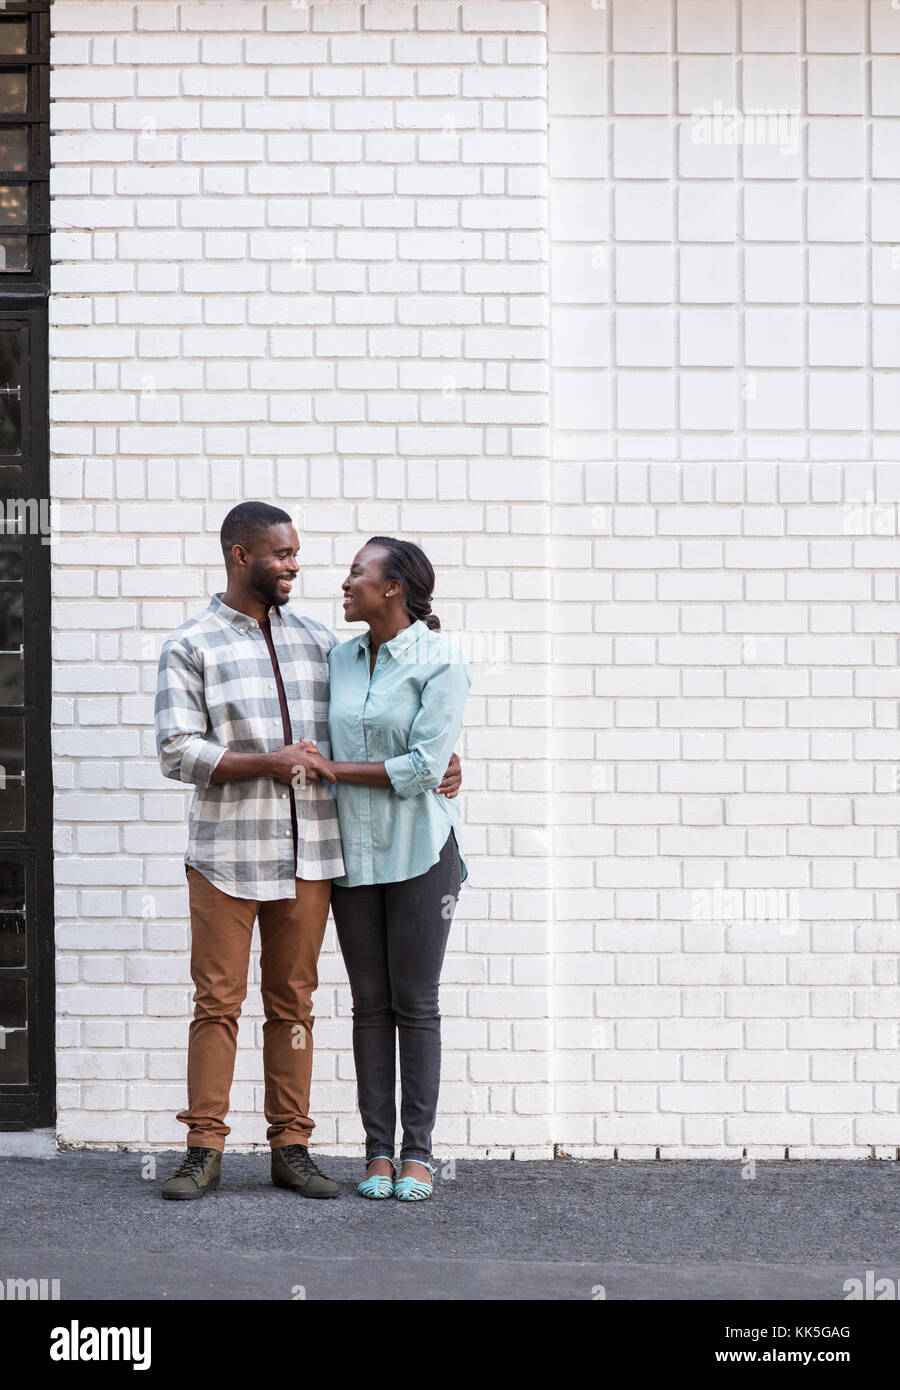 Smiling young African couple standing together in the city Stock Photo